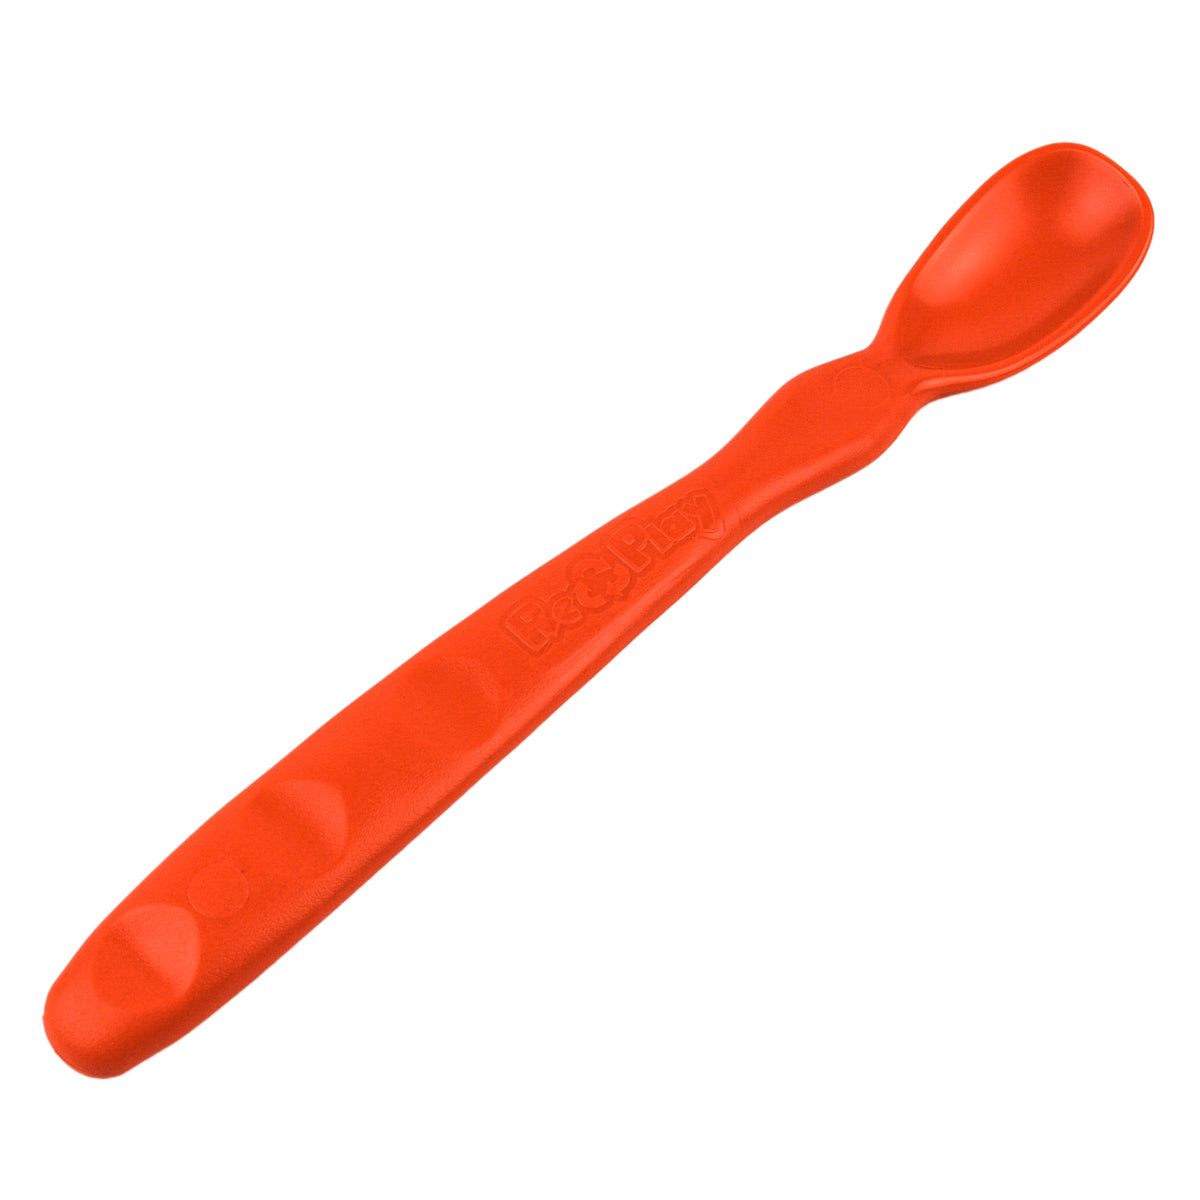 Infant Spoon - Red